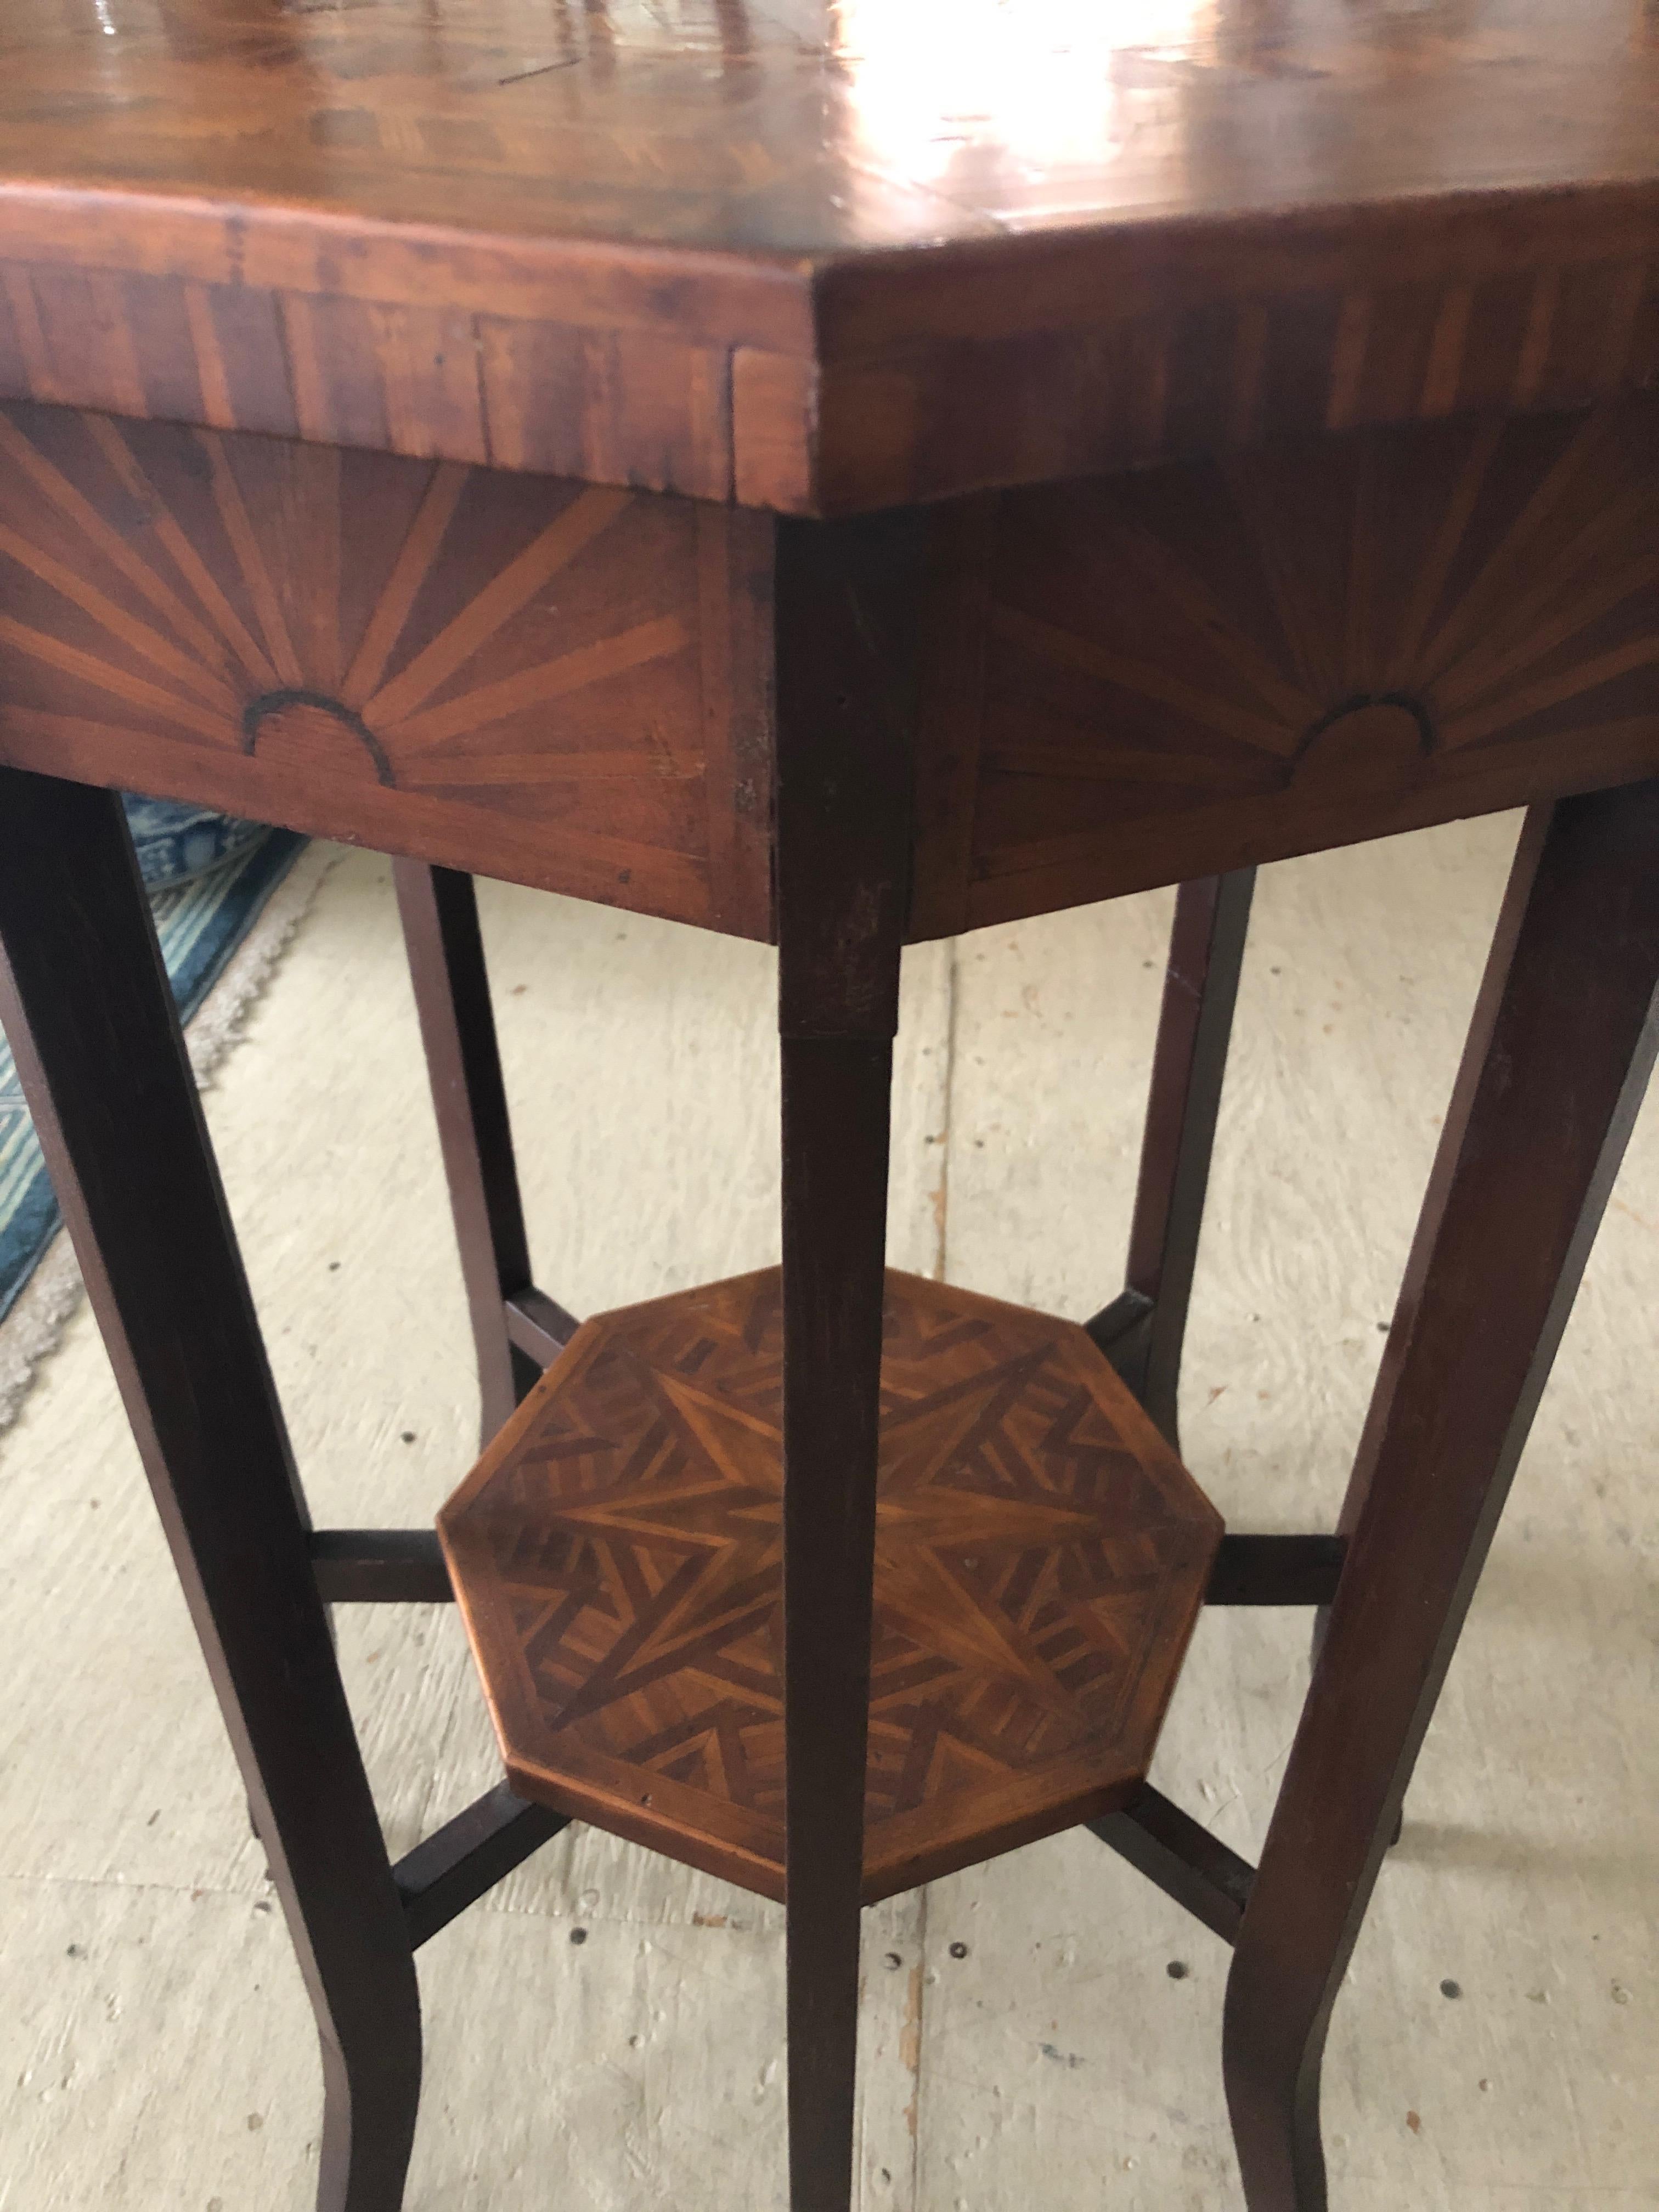 North American Elegant Antique Octagonal Side End Table with Inlaid Starburst Design